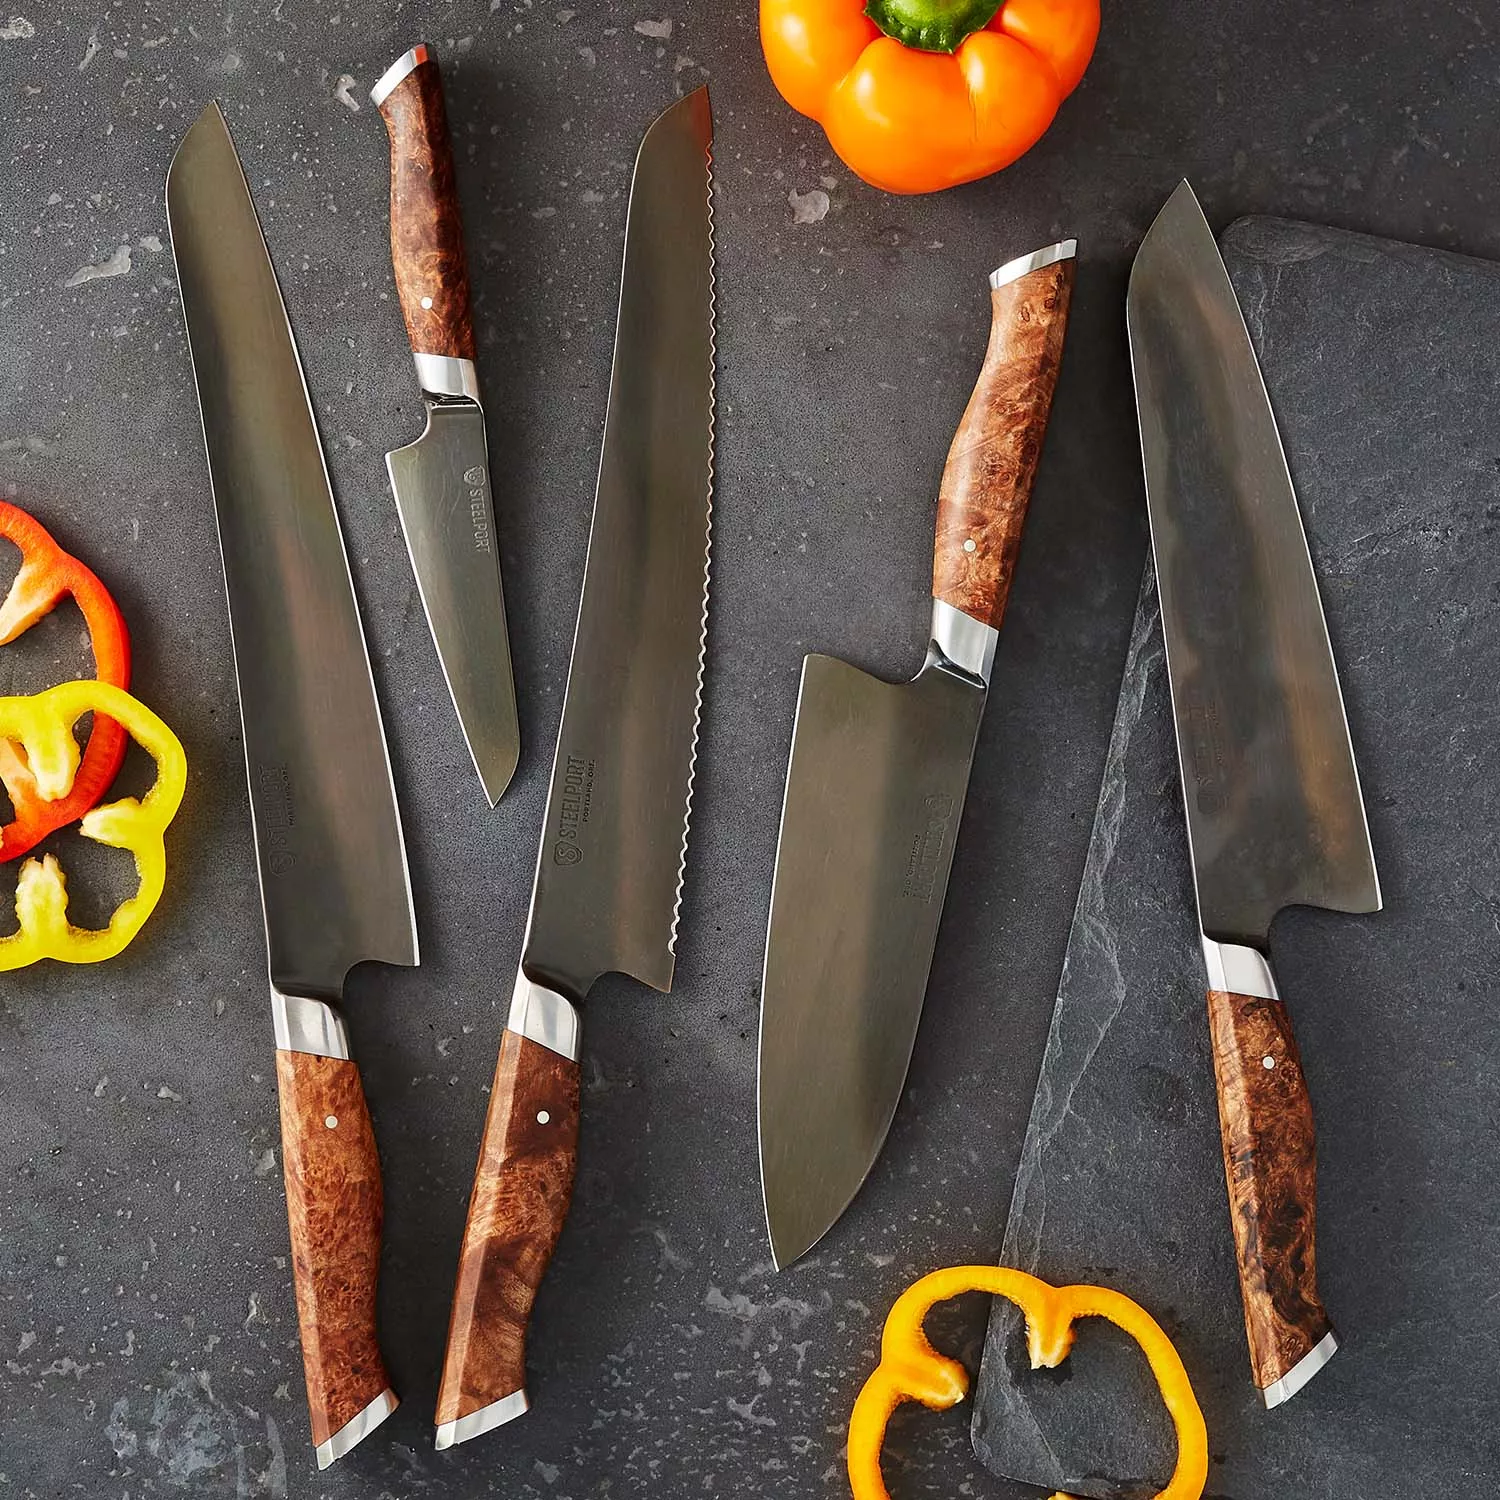 Zyliss Comfort Paring Knife Set with Sheaths 2 ct